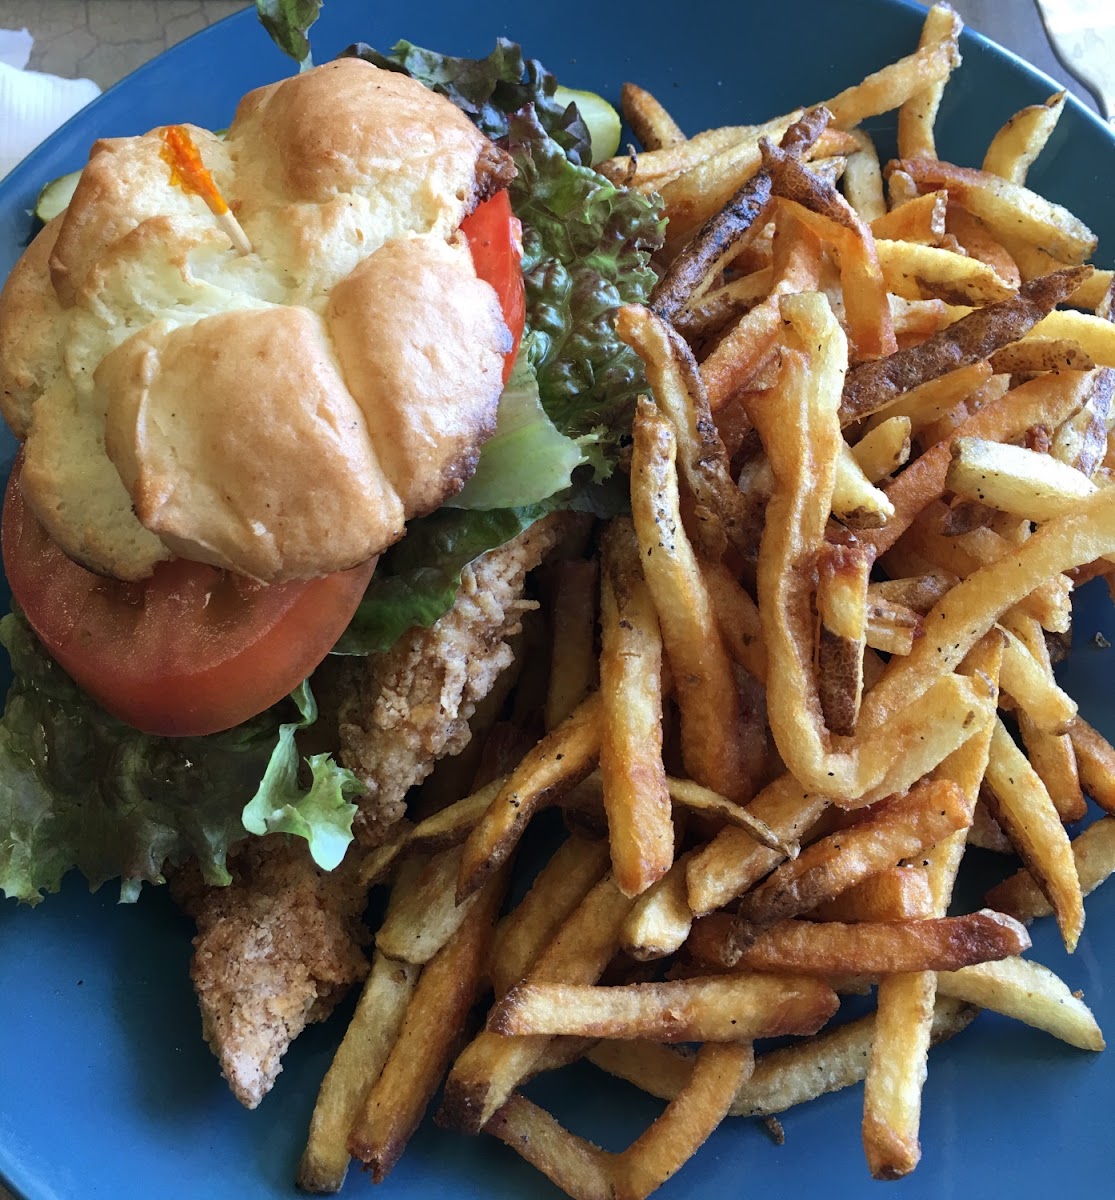 Delicious..... this is the Chicken Fried Chicken sandwich with Fries. Highly recommend this & all of their other menu items.